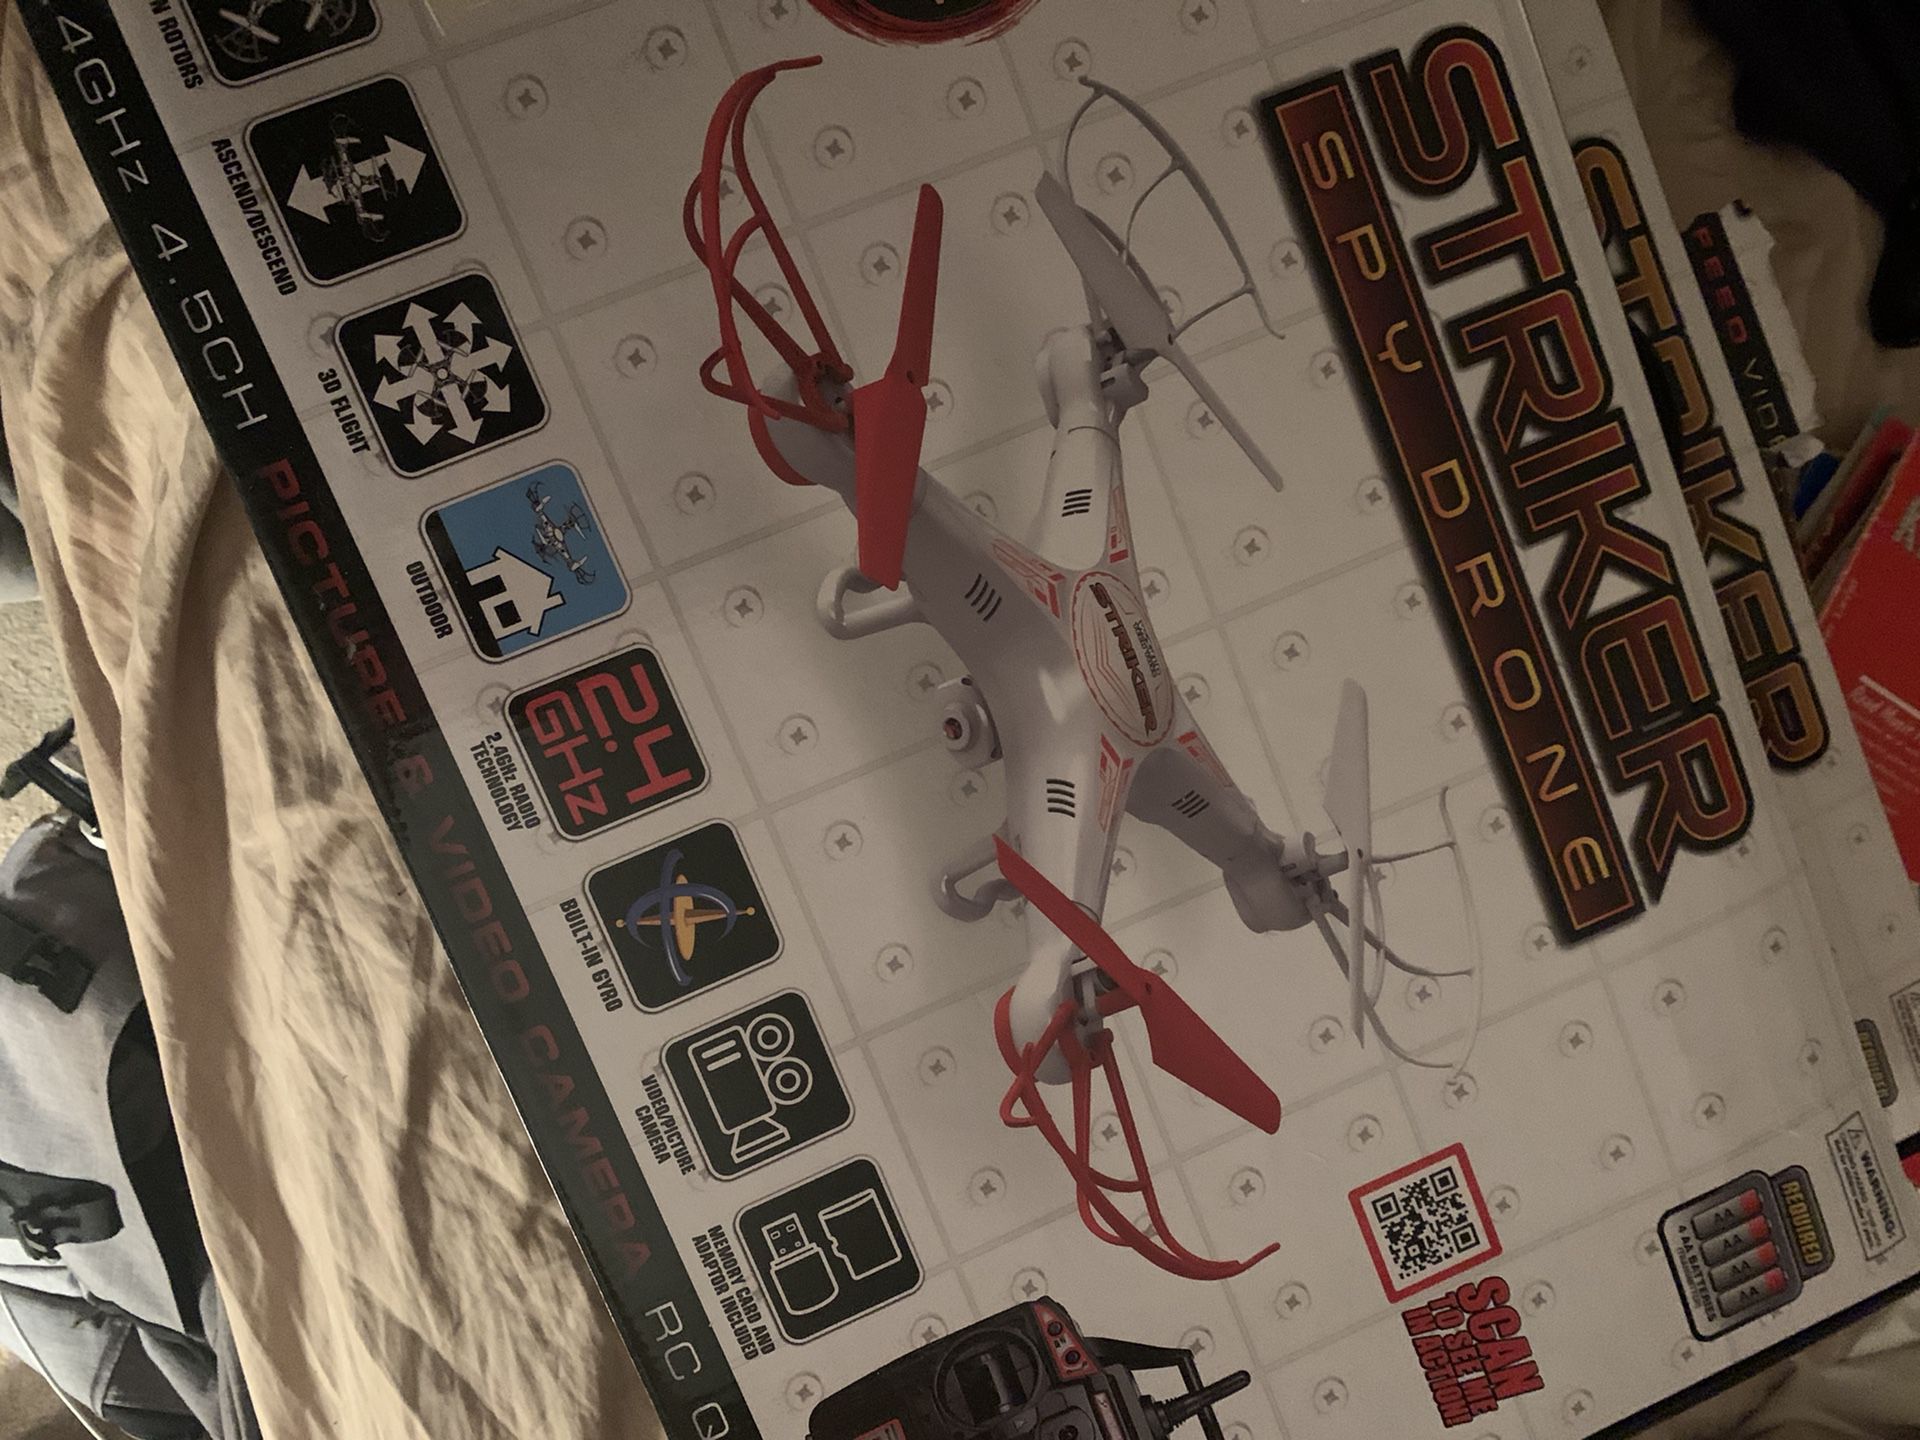 2 Stryker drones with boxes